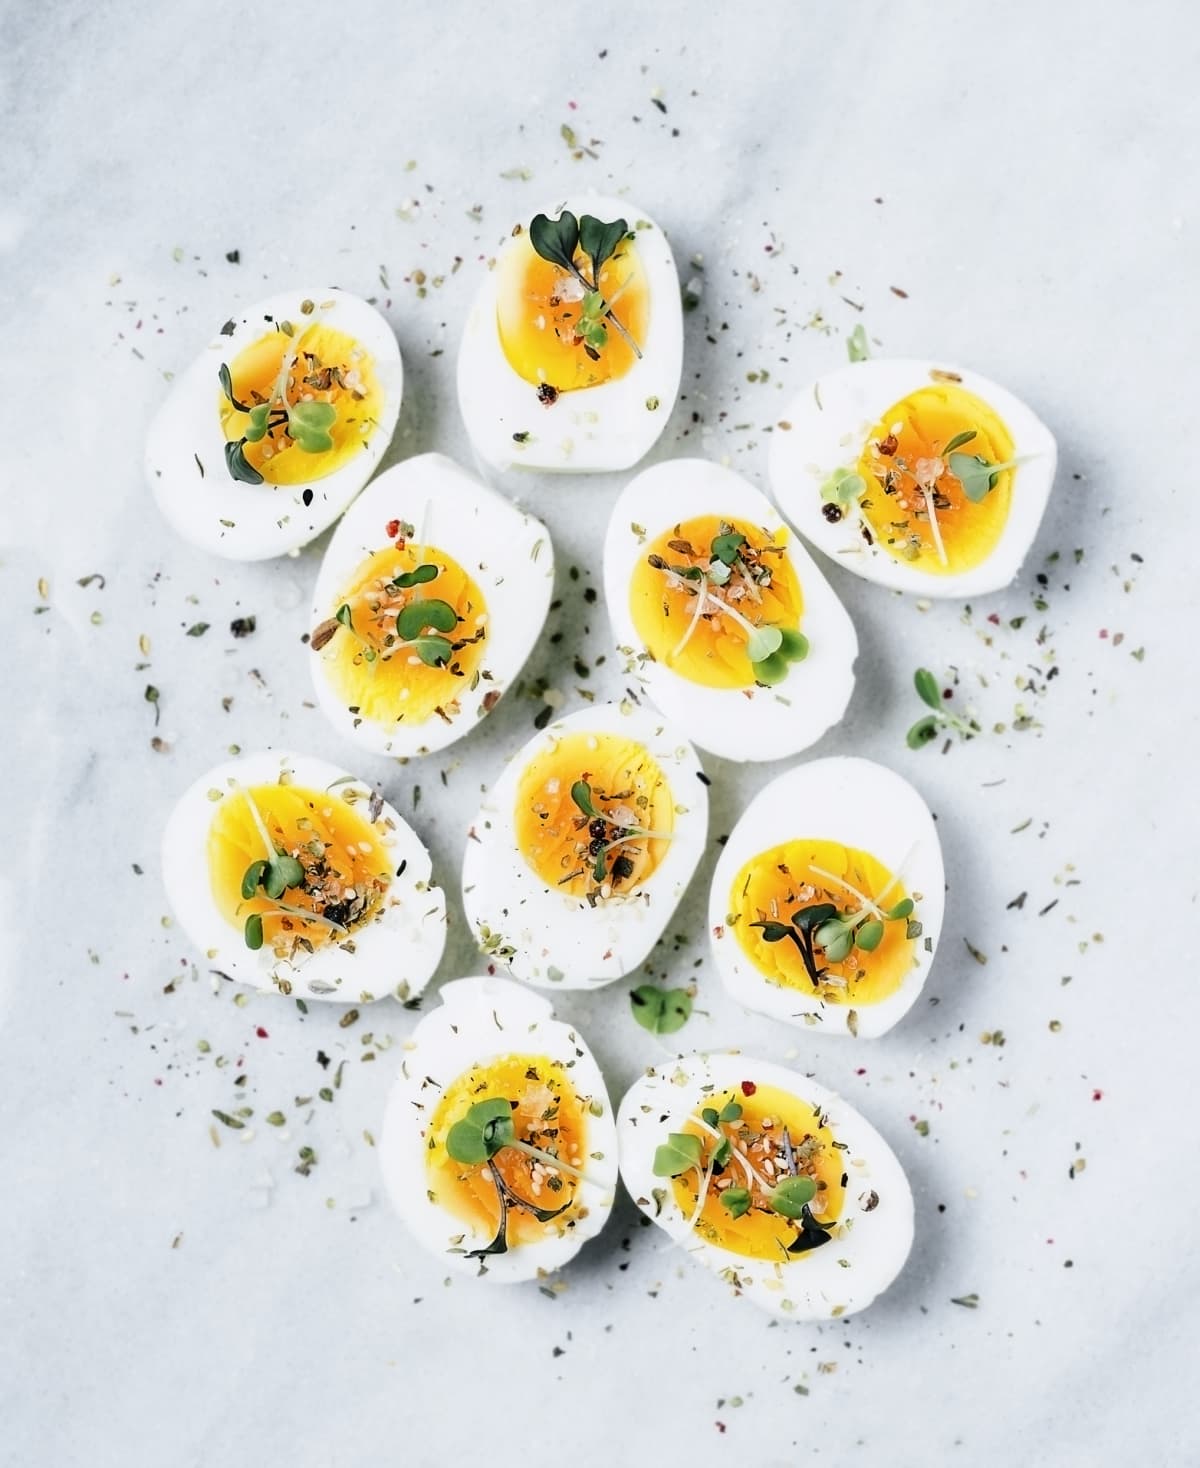 Hard boiled eggs with herbs and spices on a white background